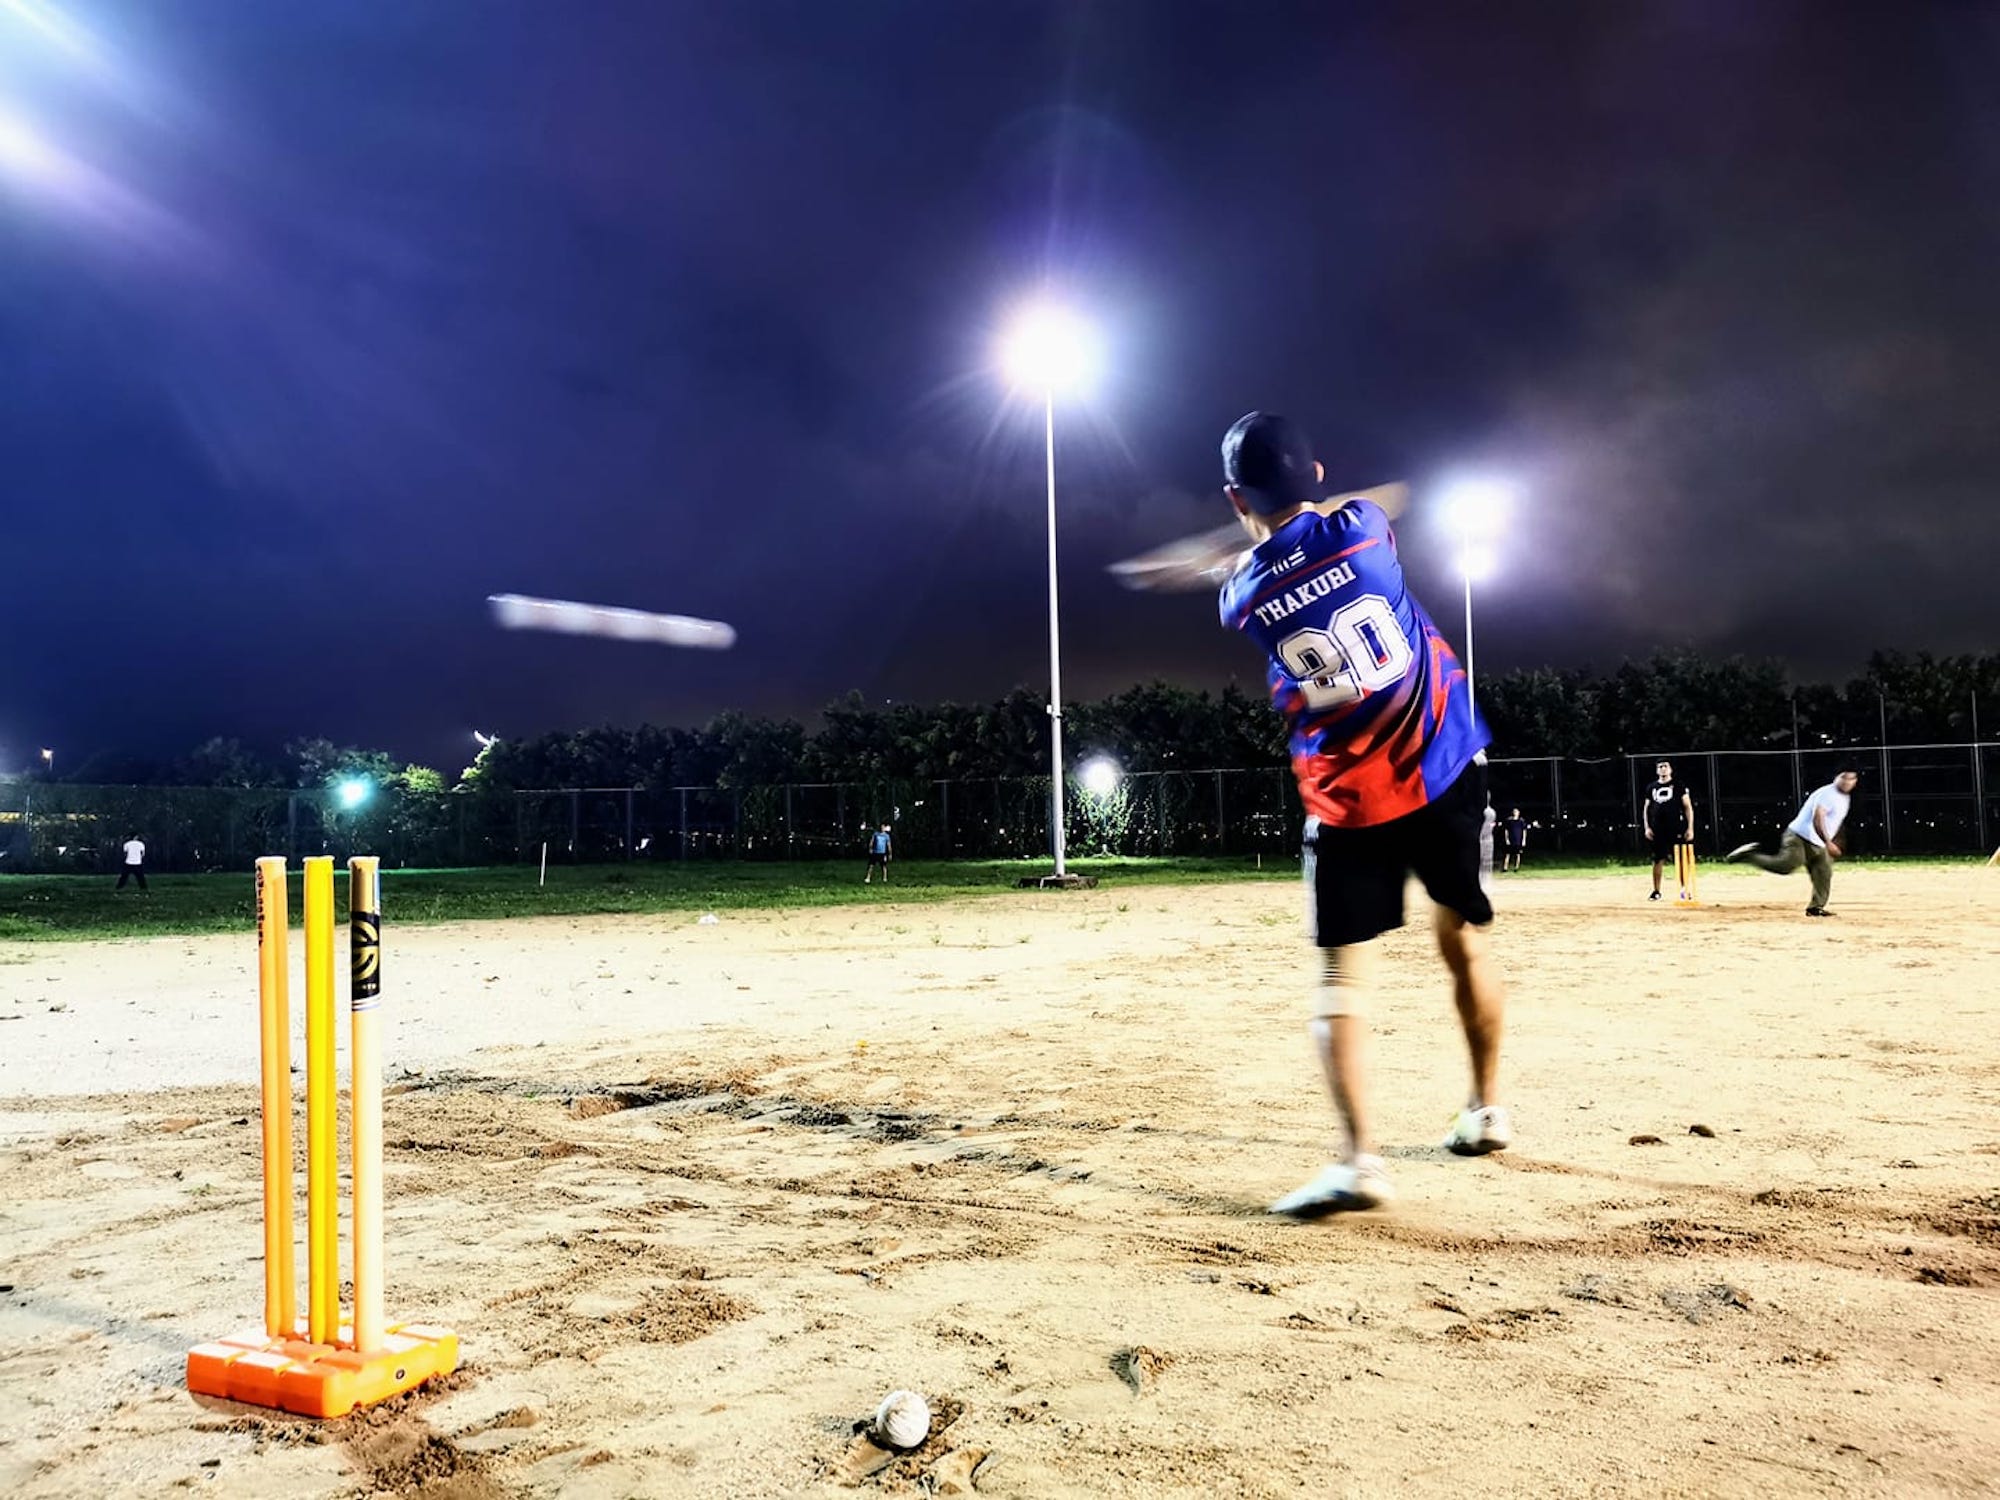 The MCA’s weekly Friday night cricket, held at a bleak sandy expanse next to the Macau Tower